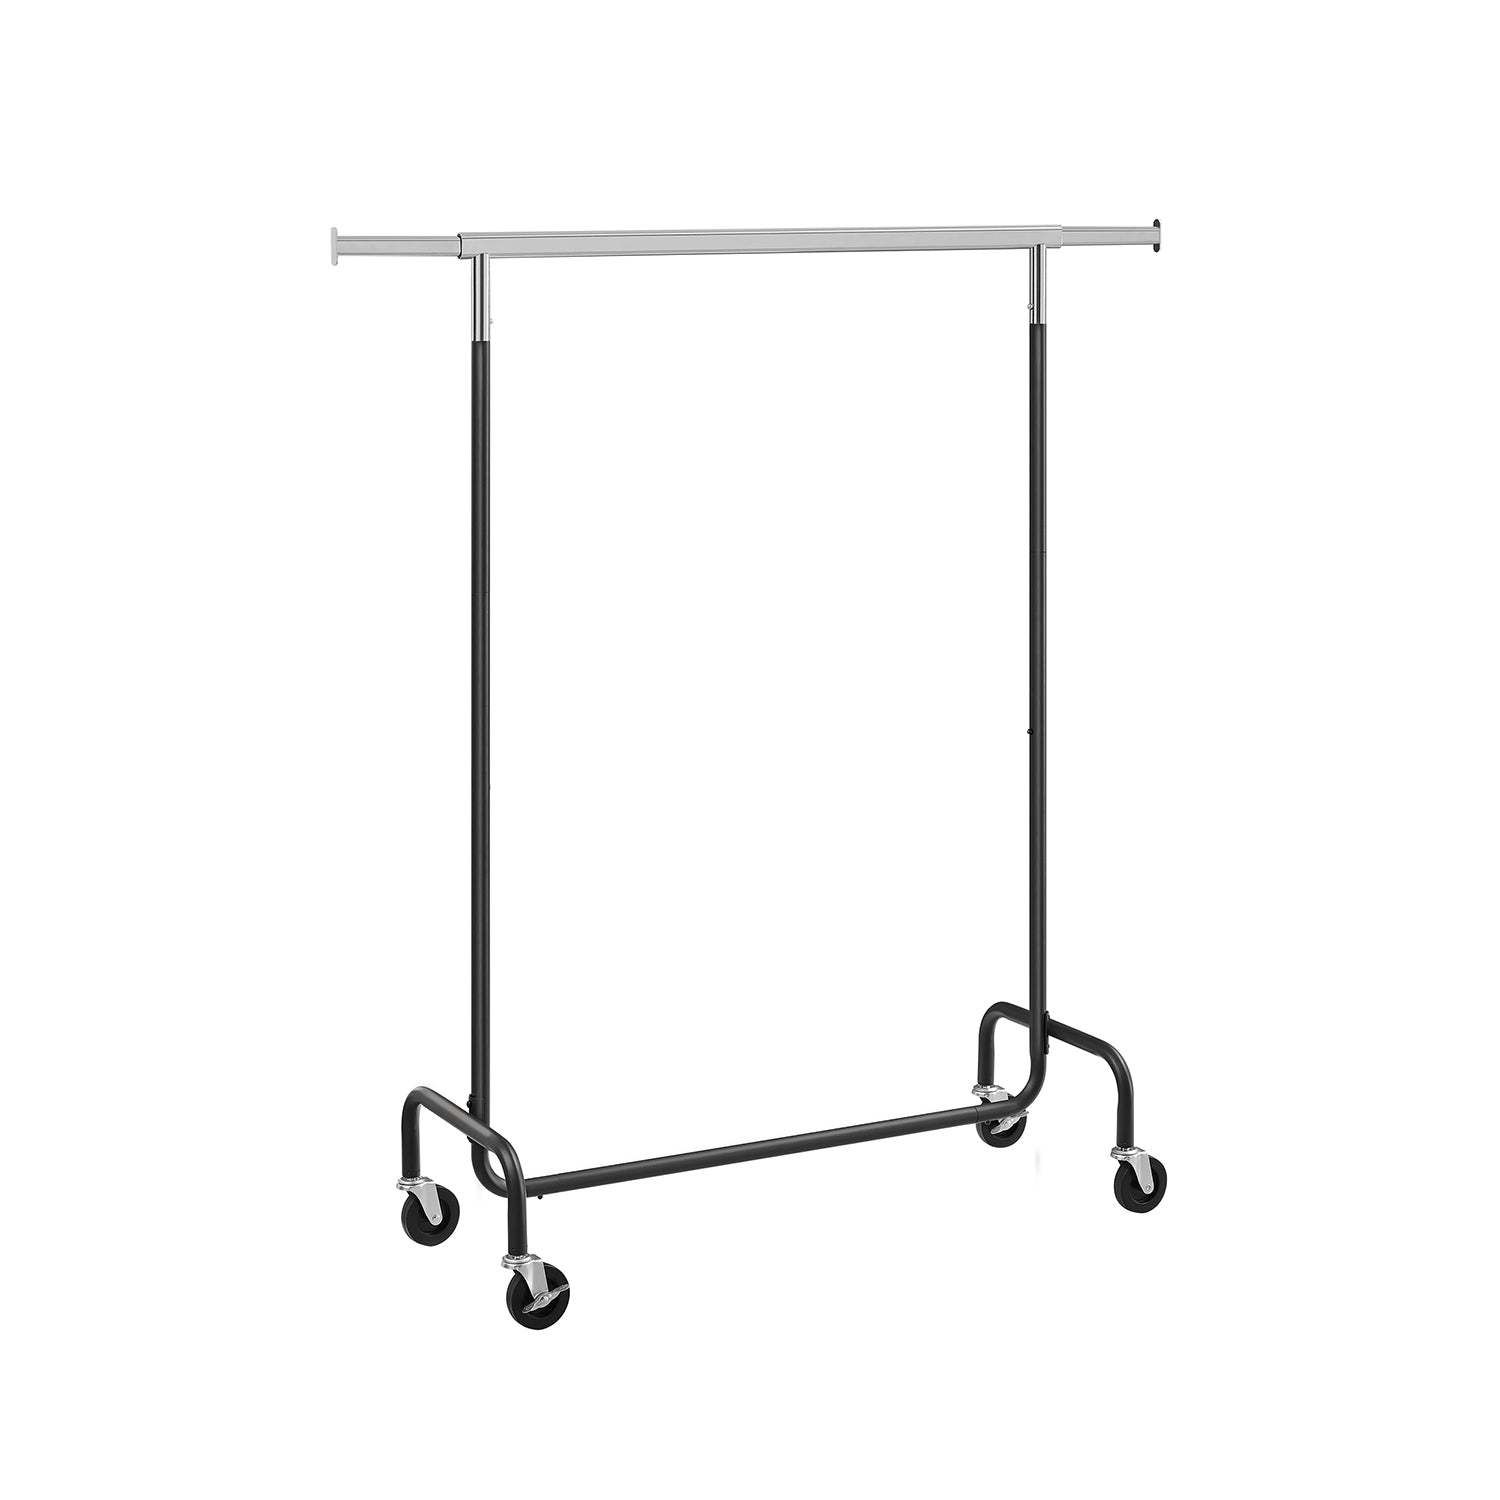 Garden Tool Organizer with Wheels and Hooks-Black